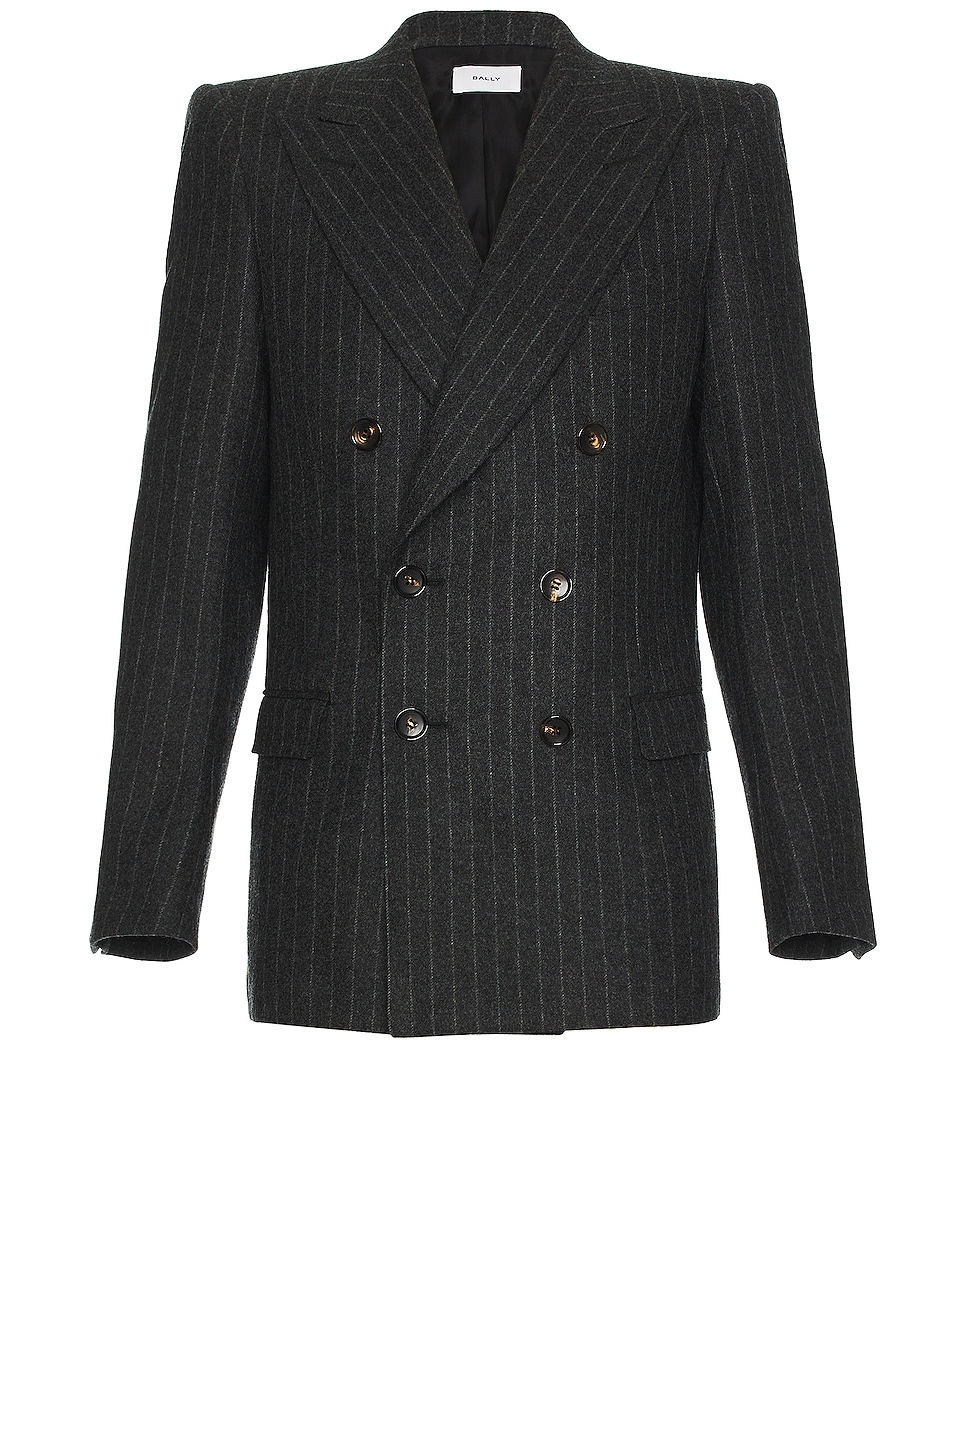 Image 1 of Bally Double Breasted Blazer in Grey Melange